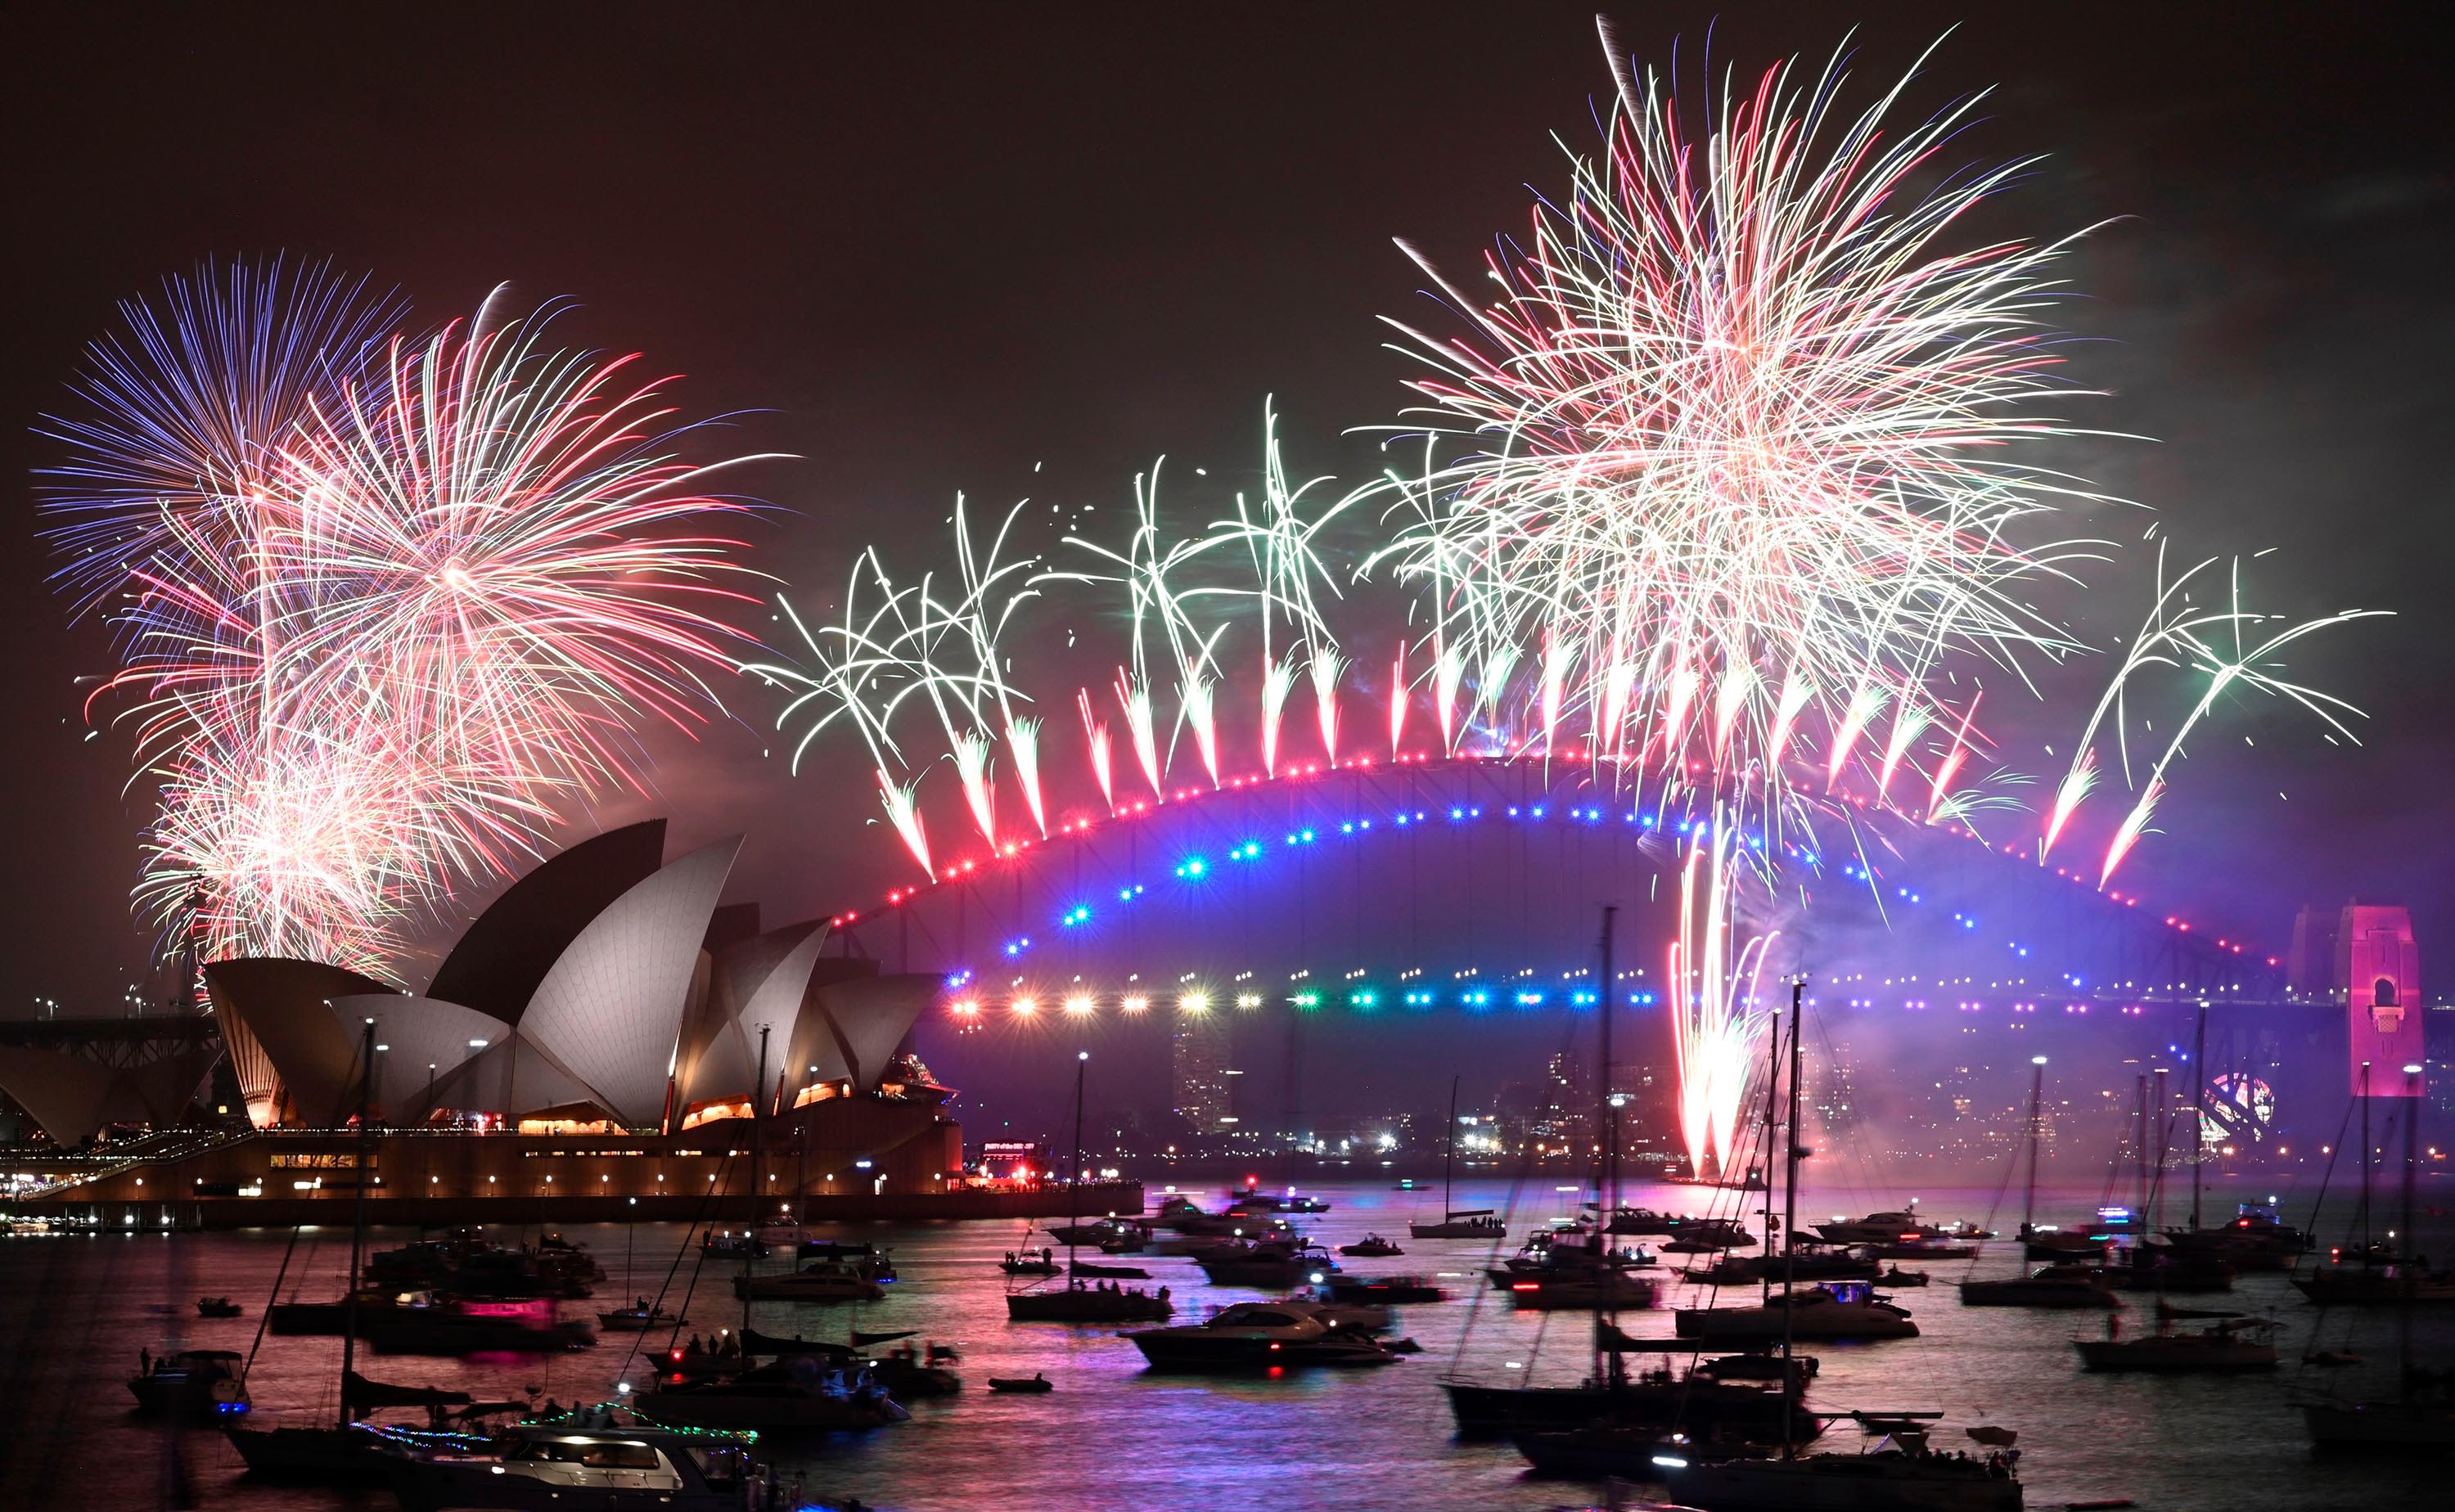 New Year's Eve celebrations around the world: Traditions embraced